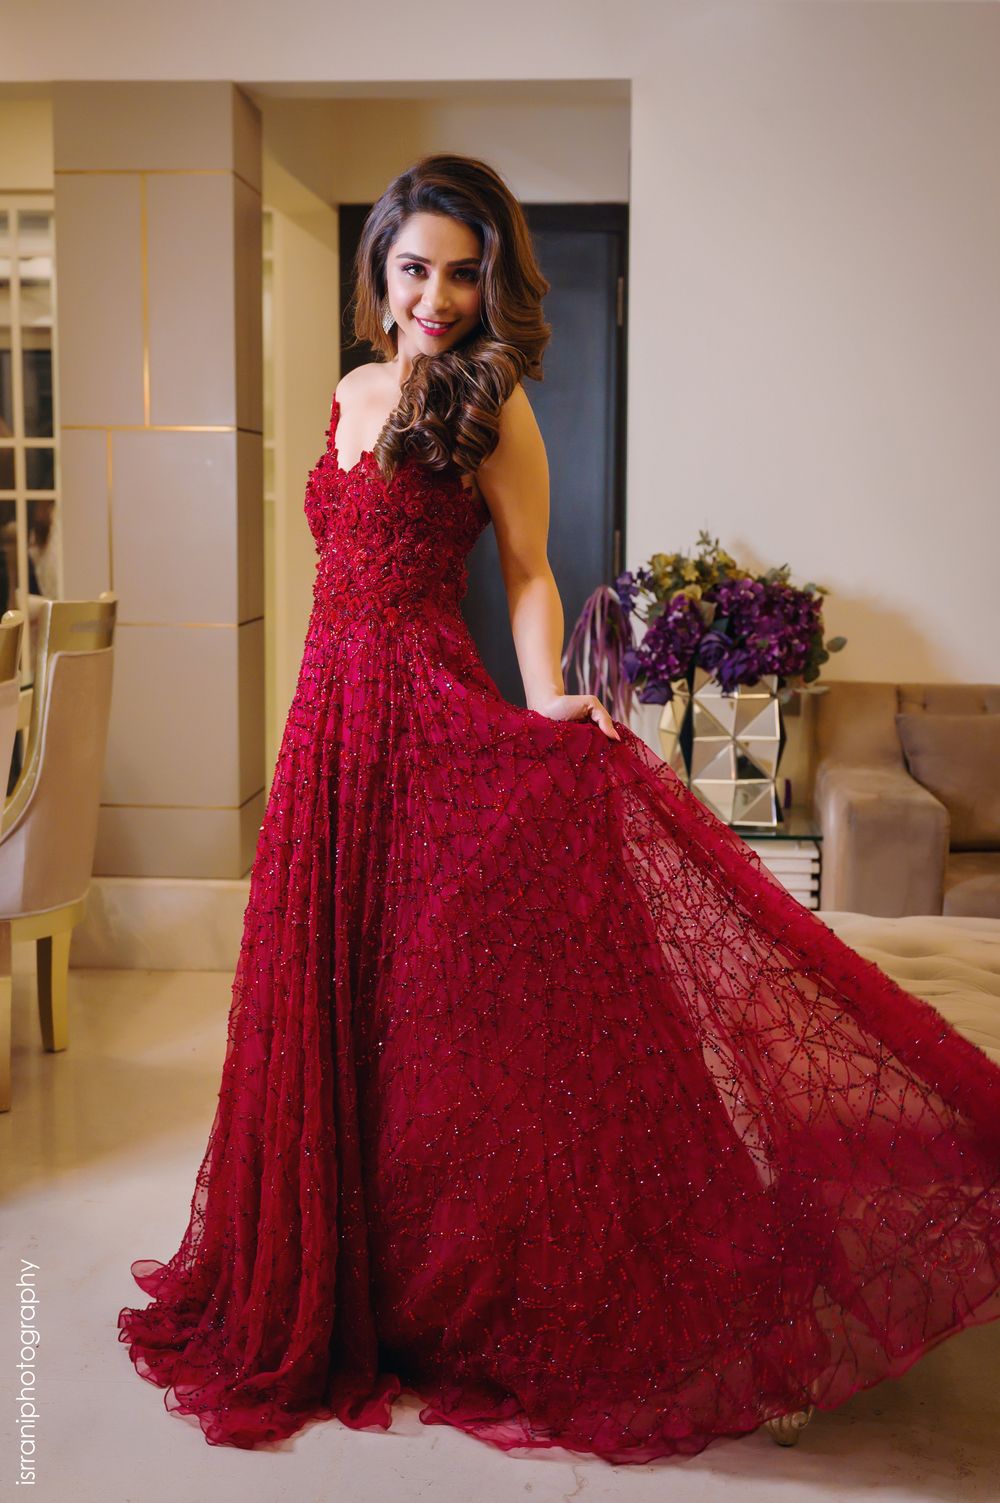 Photo of A gorgeous bridal portrait of the bride in a red gown